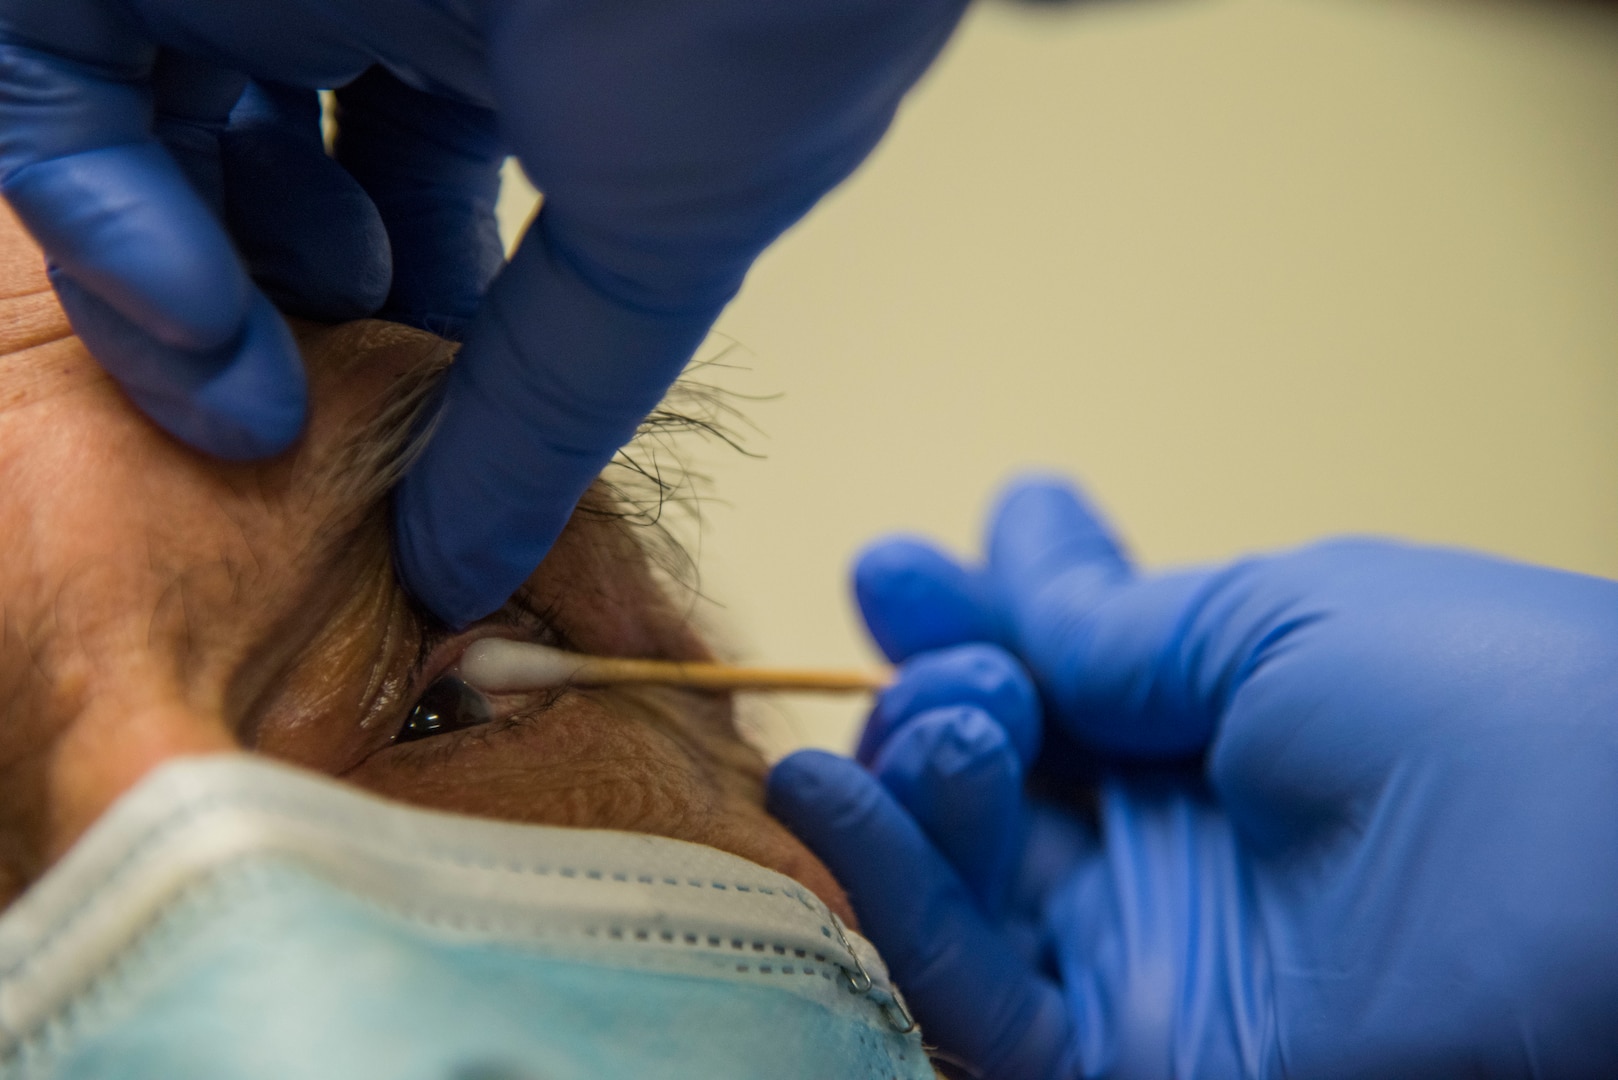 A patient's eye is numbed to prevent sudden movements and ensure accuracy of an intra-ocular injection.